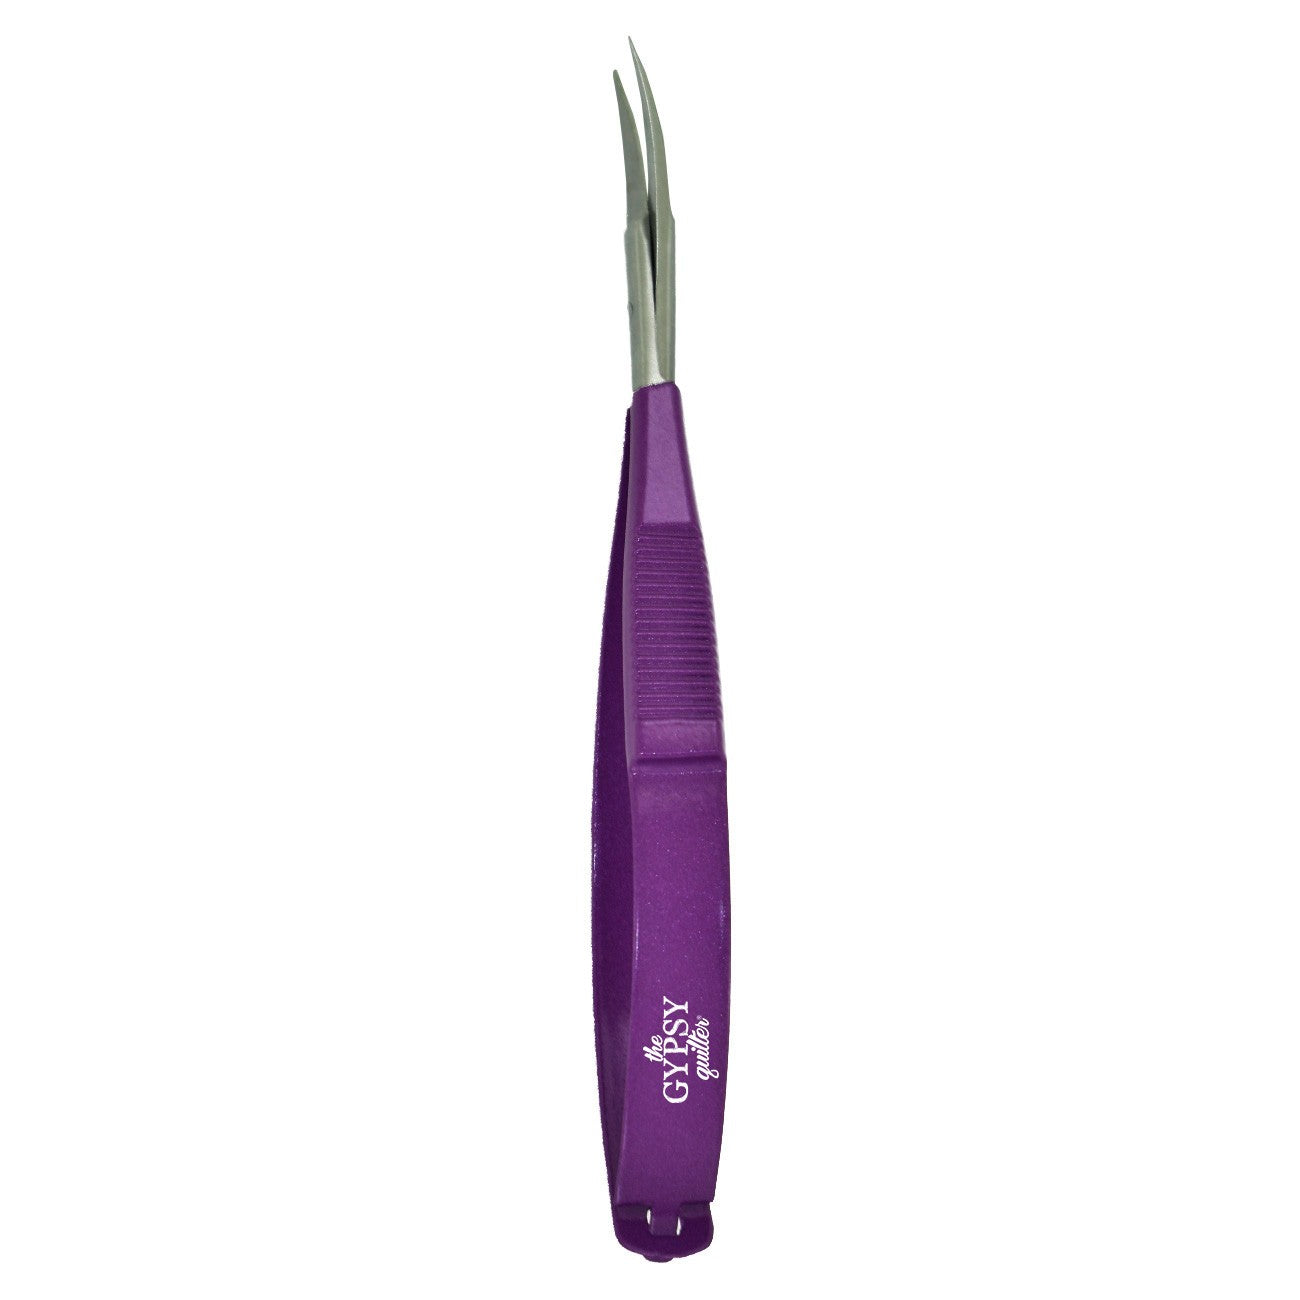 EZ Snip Serrated Curved Blade 5in from The Gypsy Quilter